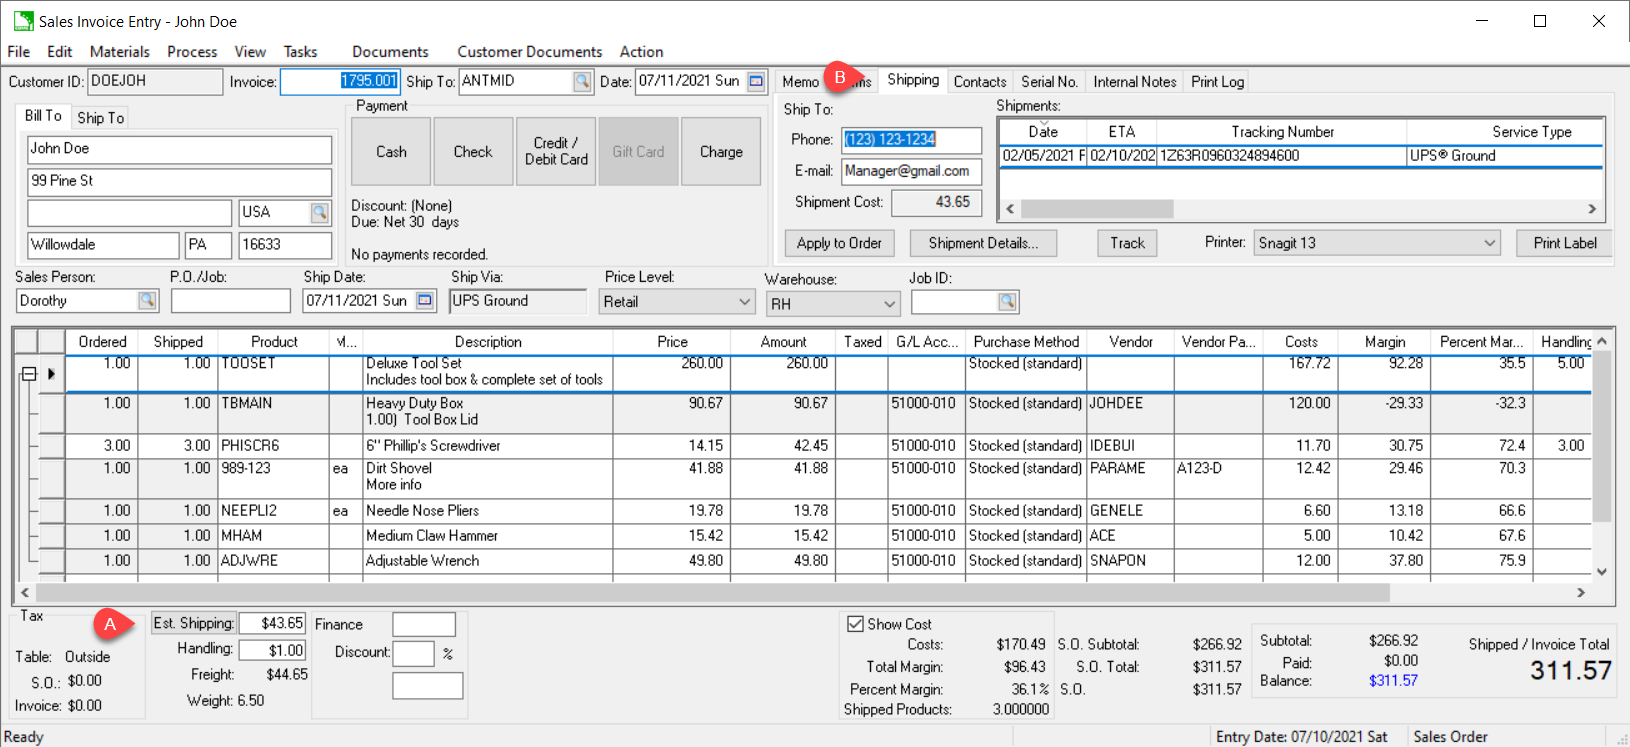 Calculating Freight Charges on Sales Invoice